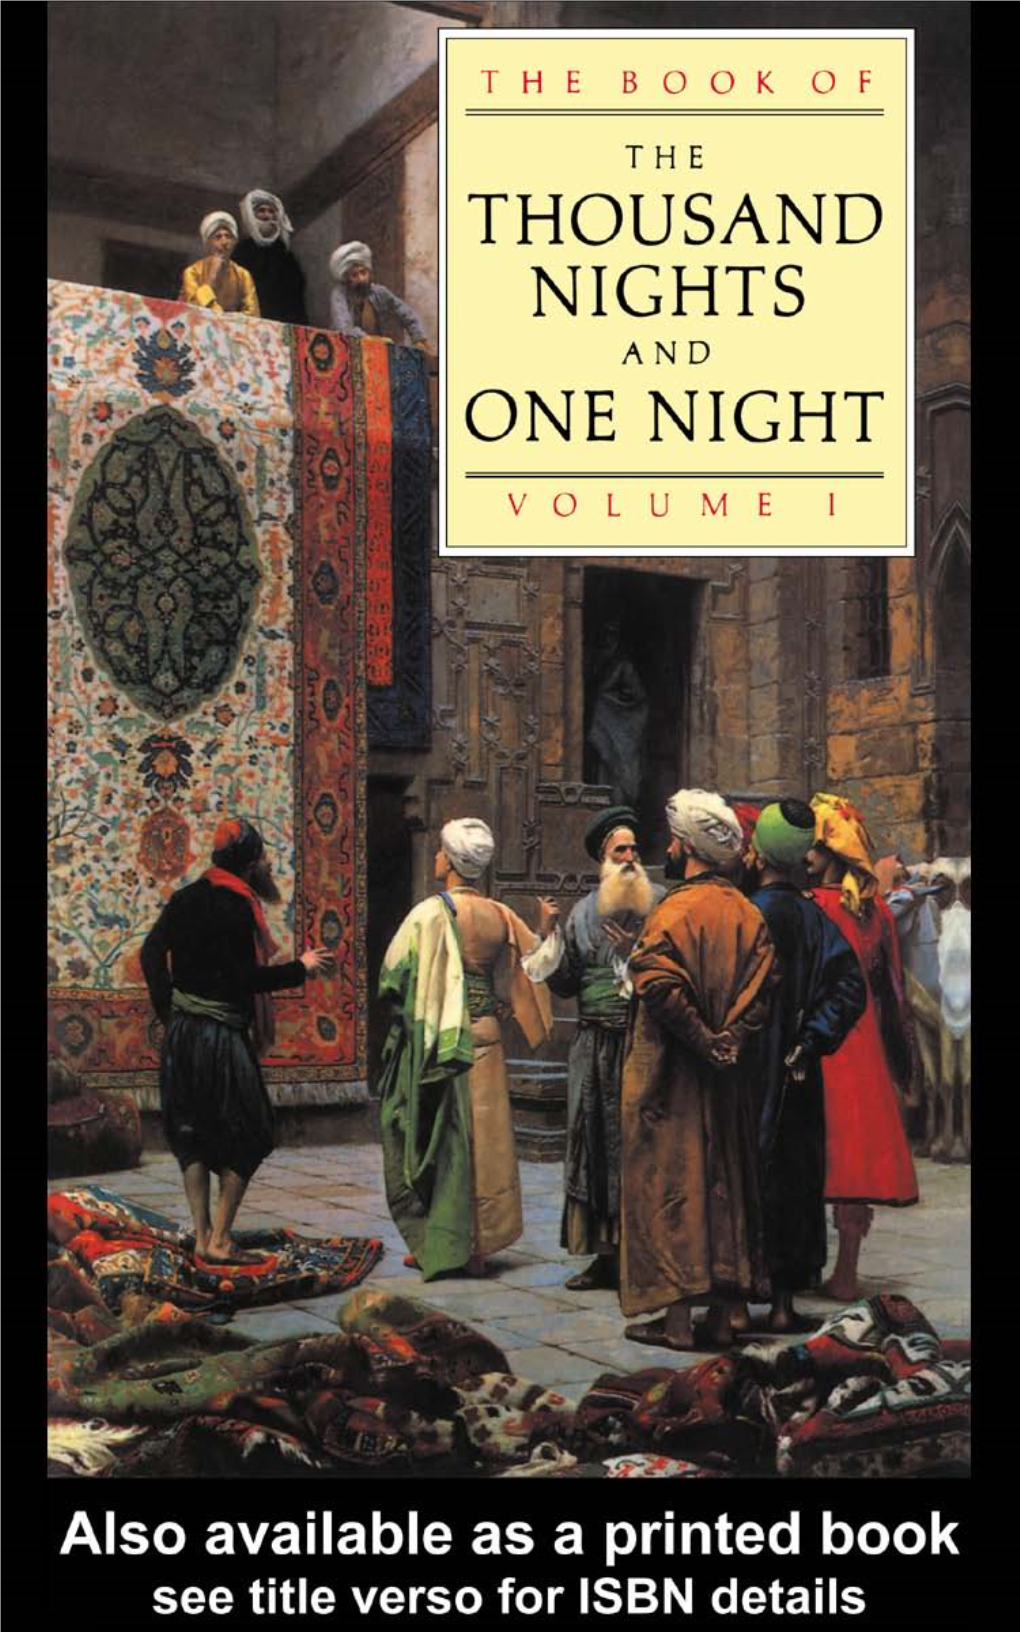 The Book of the Thousand Nights and One Night, Volume I